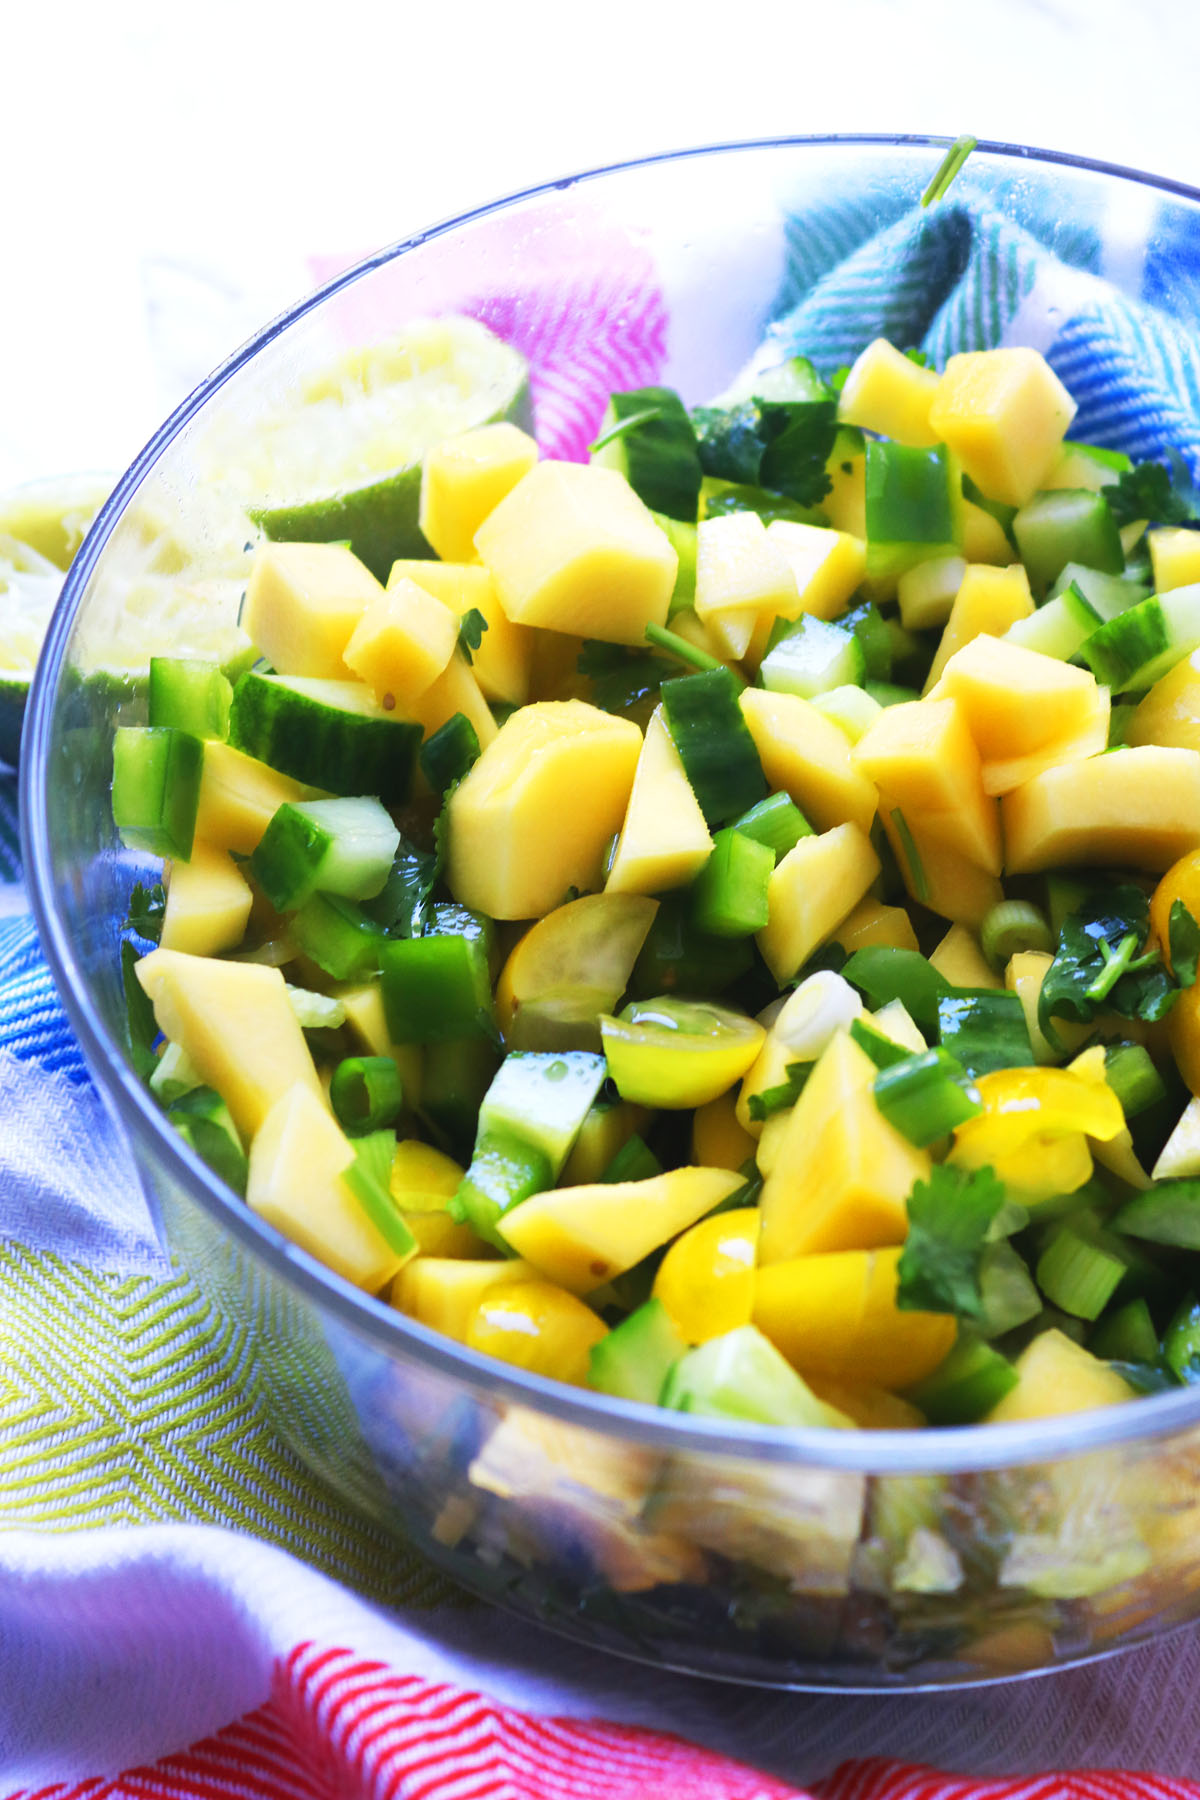 Cool Mango Salsa made with ripe mango, yellow tomatoes, spring oniones, coriander and cucumber